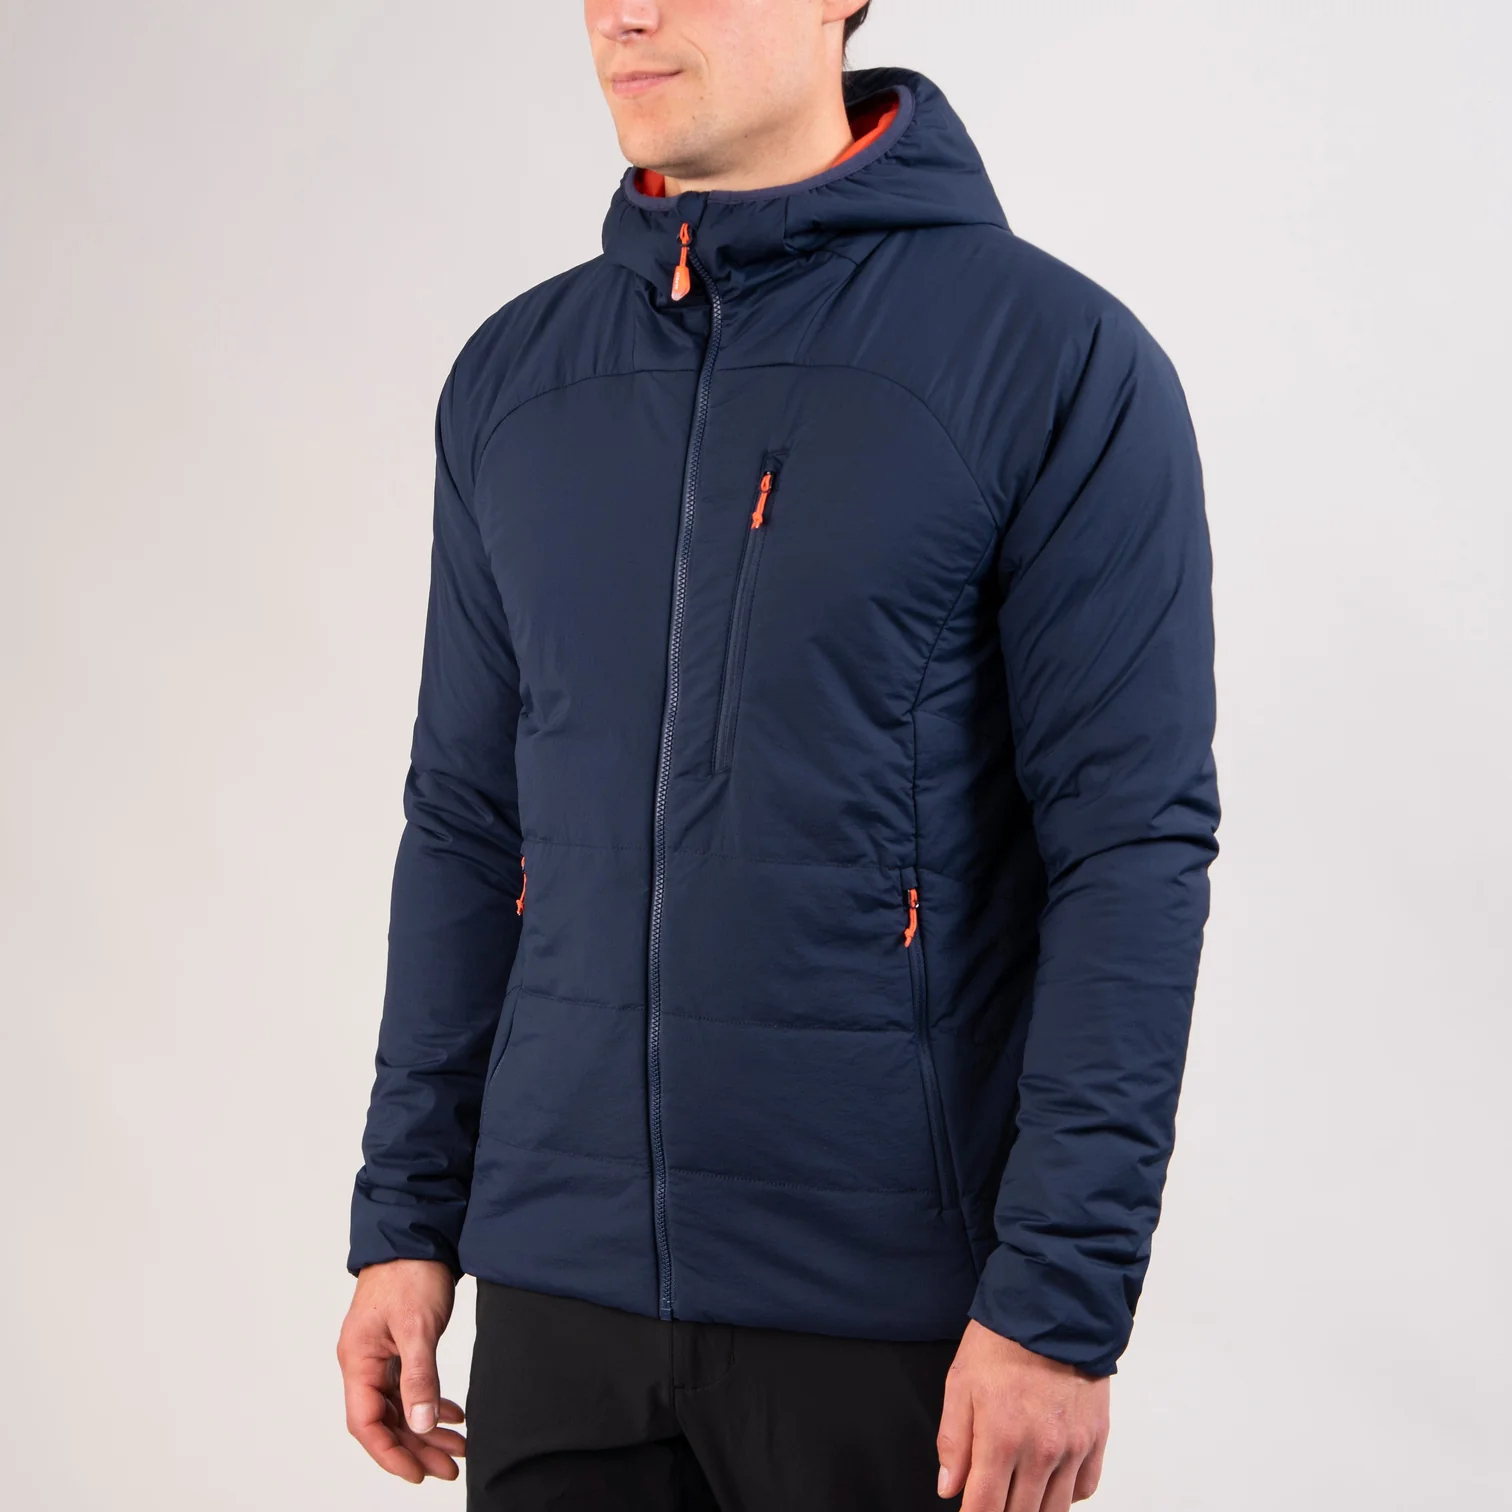 NEW STYLE BREATHABLE THIAB WATERPROOF MANS INSULATED JACKET